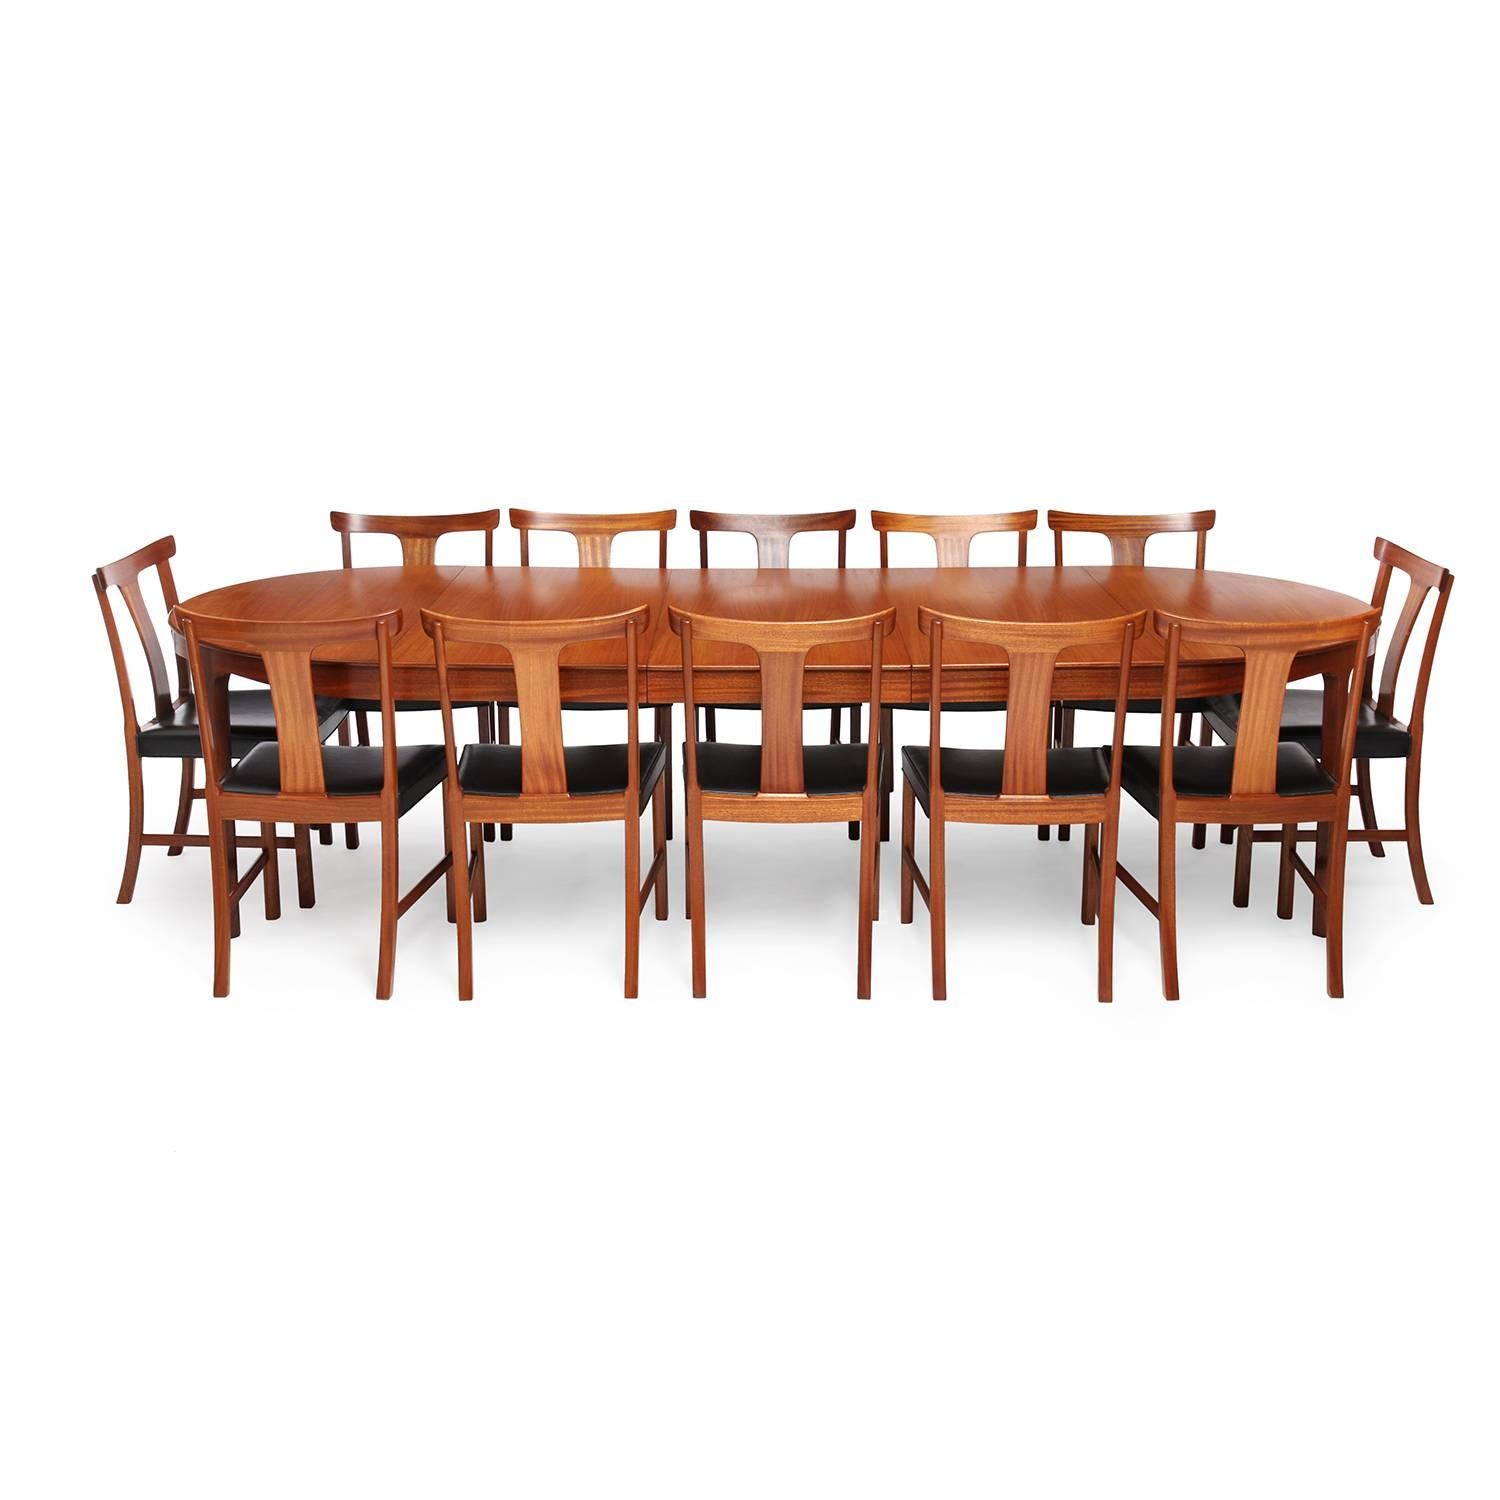 A spare, sculptural and finely proportioned expandable oval dining table in rich mahogany having a subtly scalloped apron and carved tapering legs